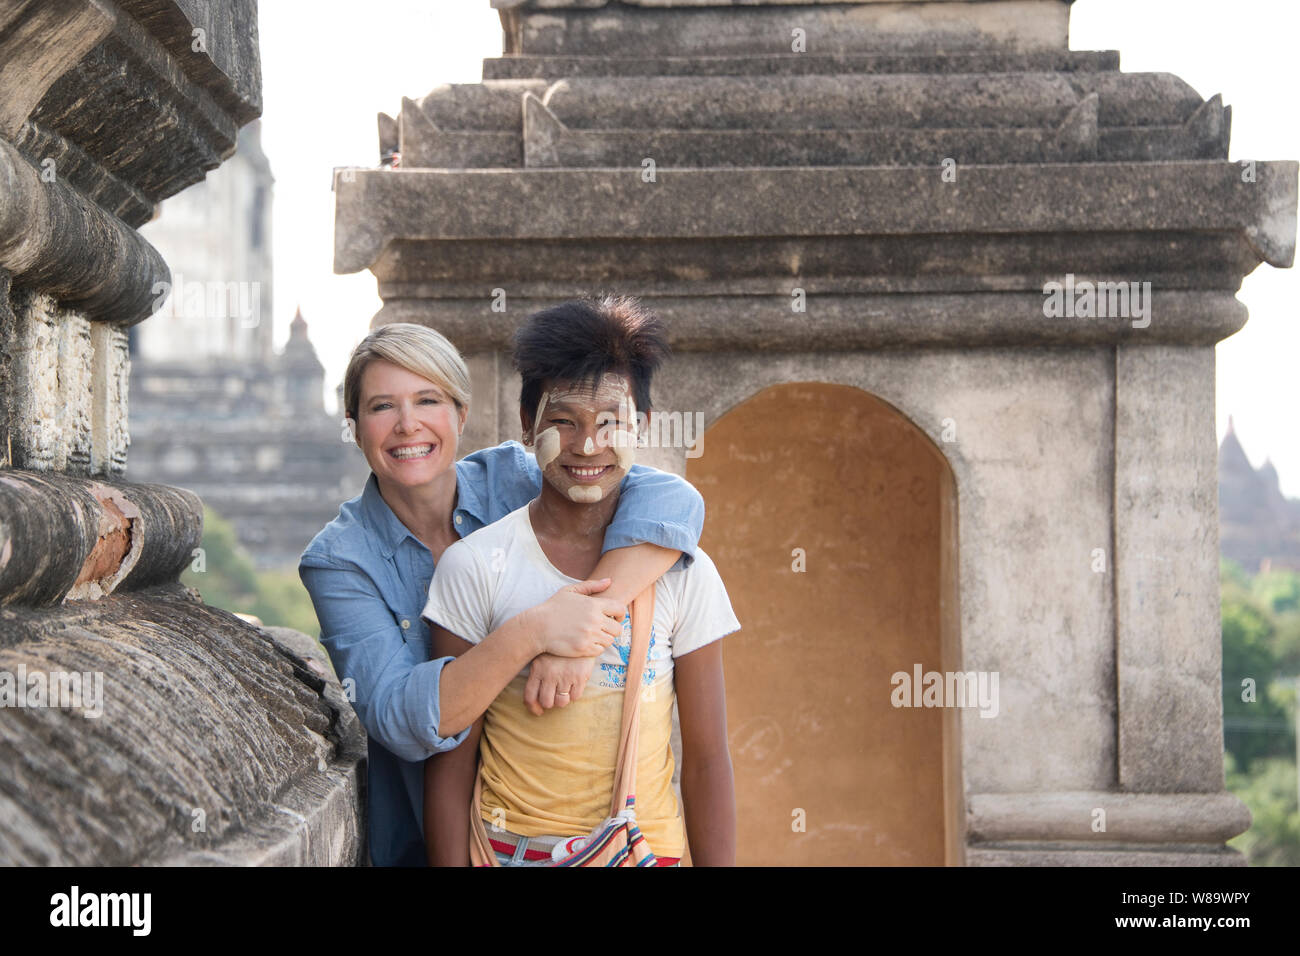 A Very Happy Female Caucasian Tourist and Burmese Young Boy with the Traditional Thanaka Makeup a White Cosmetic Paste in Bagam Myanmar-Woman Released. Stock Photo